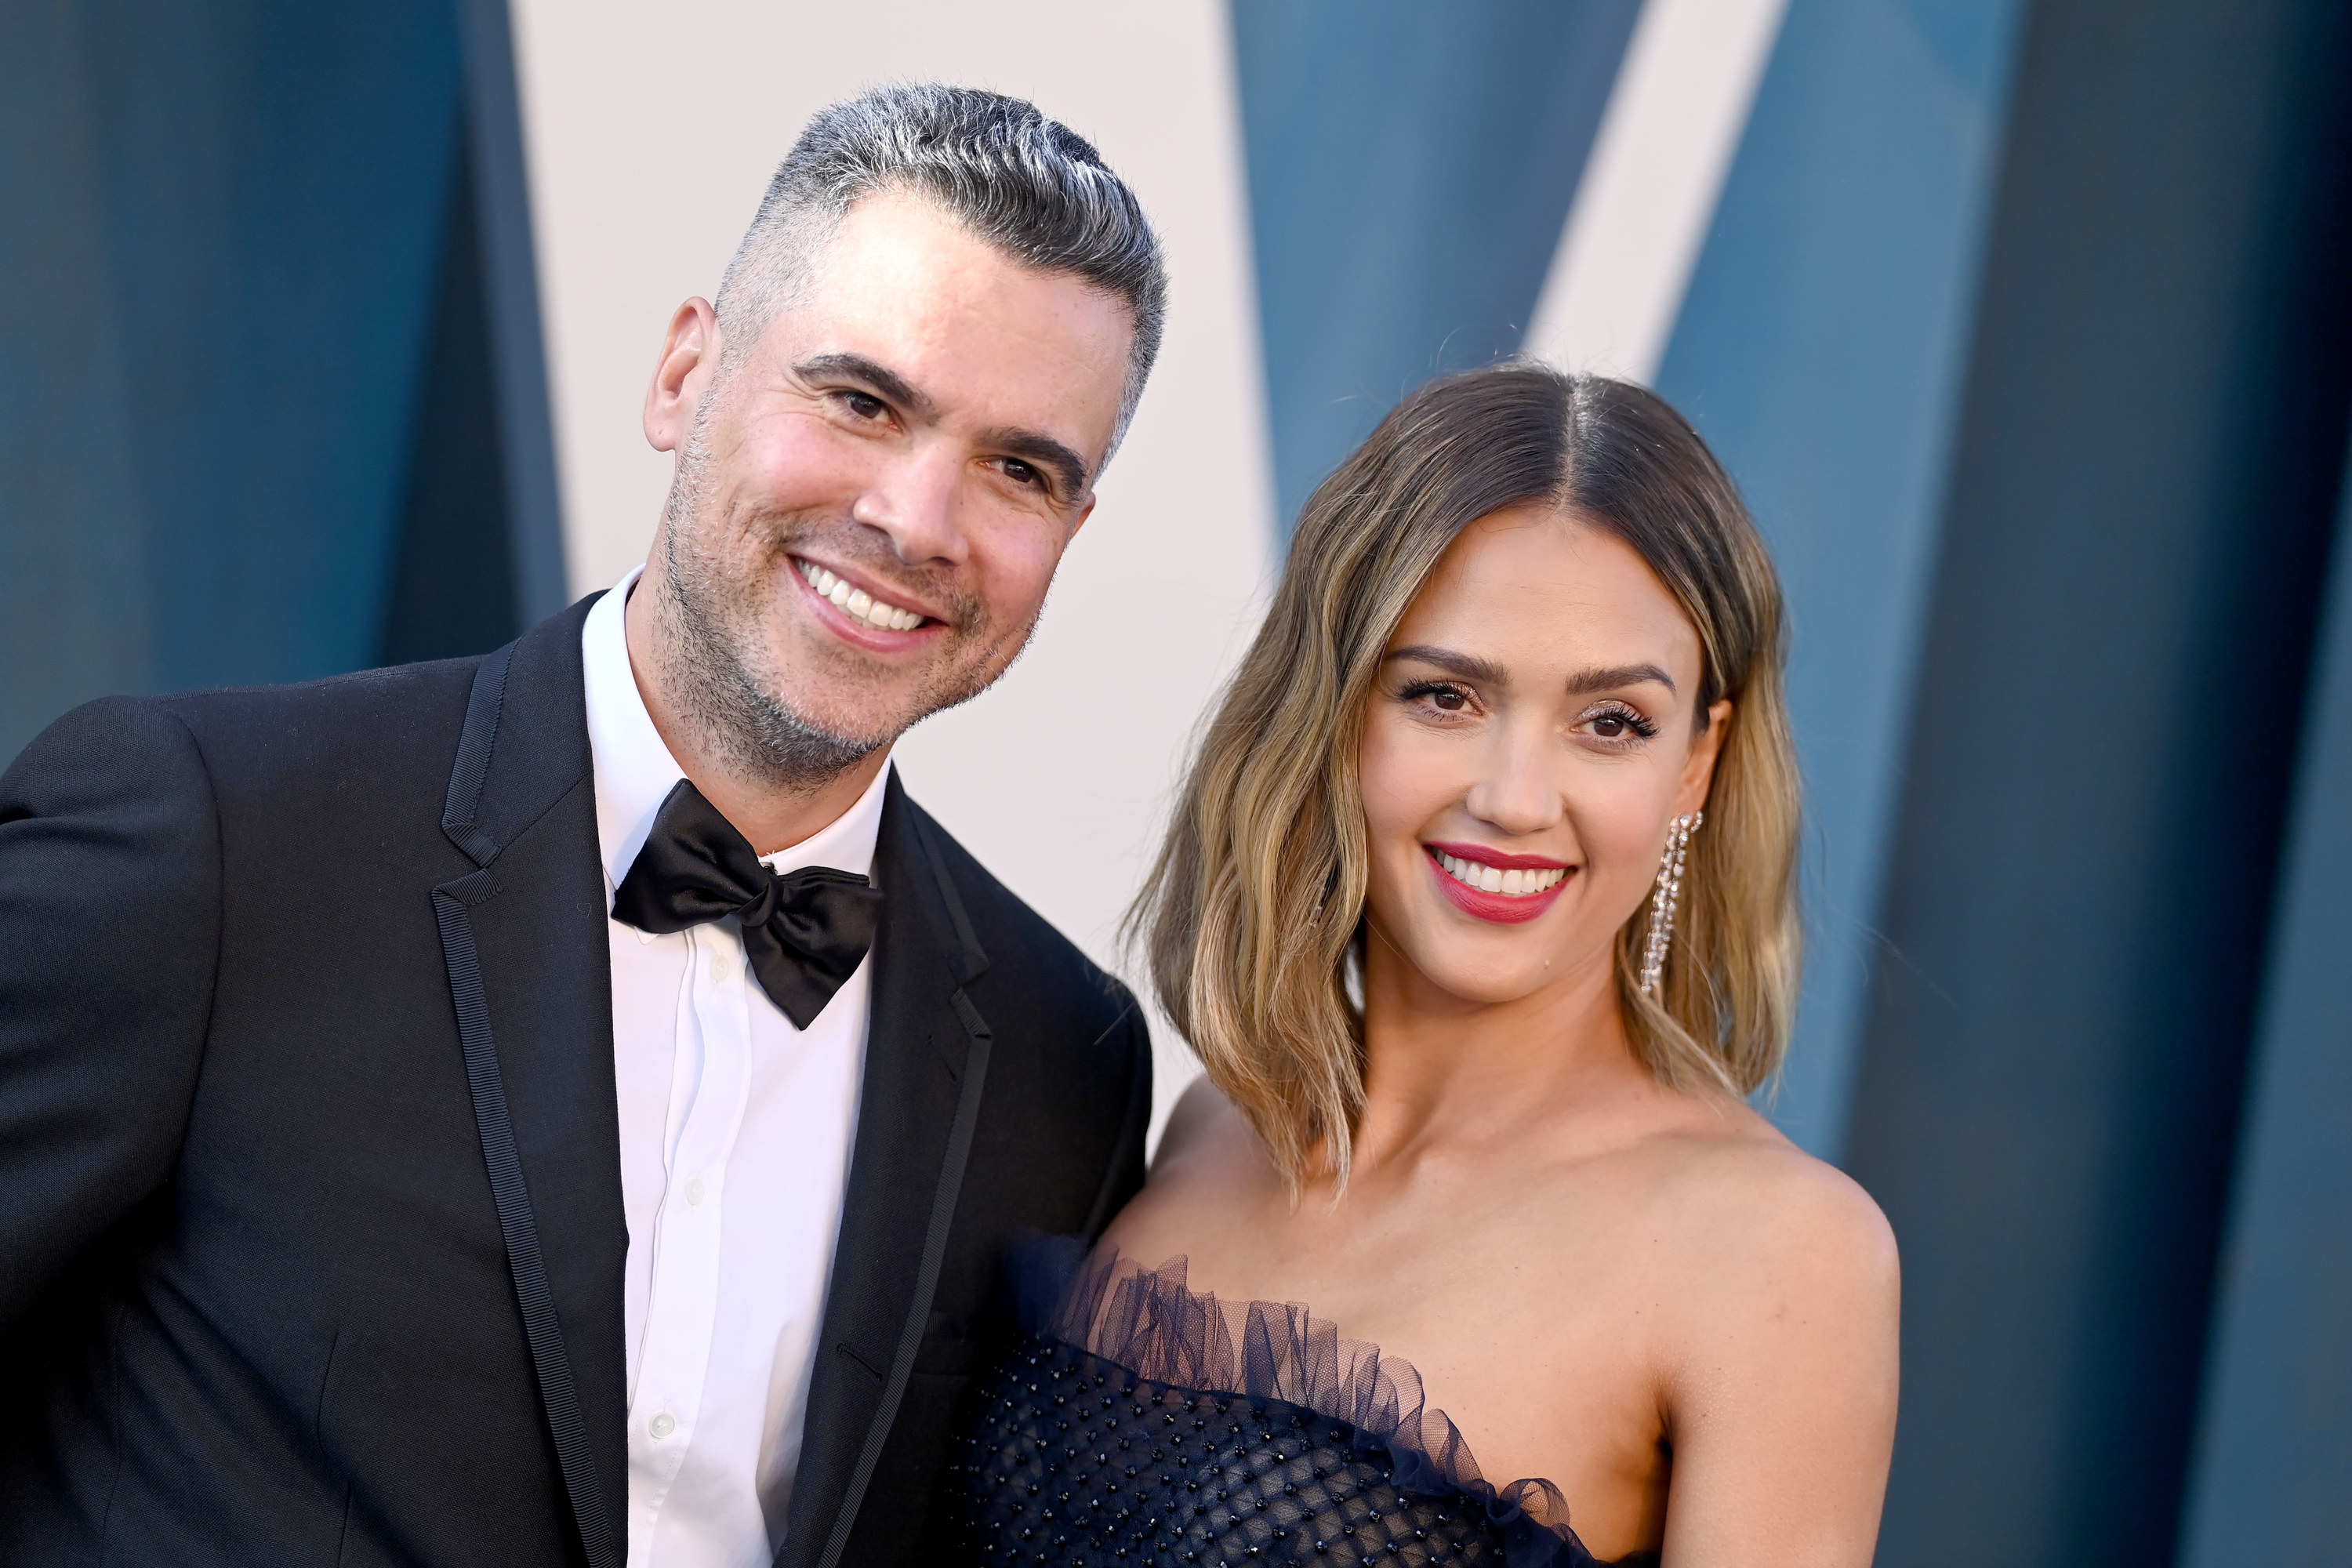 Cash Warren and Jessica Alba attend the 2022 Vanity Fair Oscar Party hosted by Radhika Jones at Wallis Annenberg Center for the Performing Arts